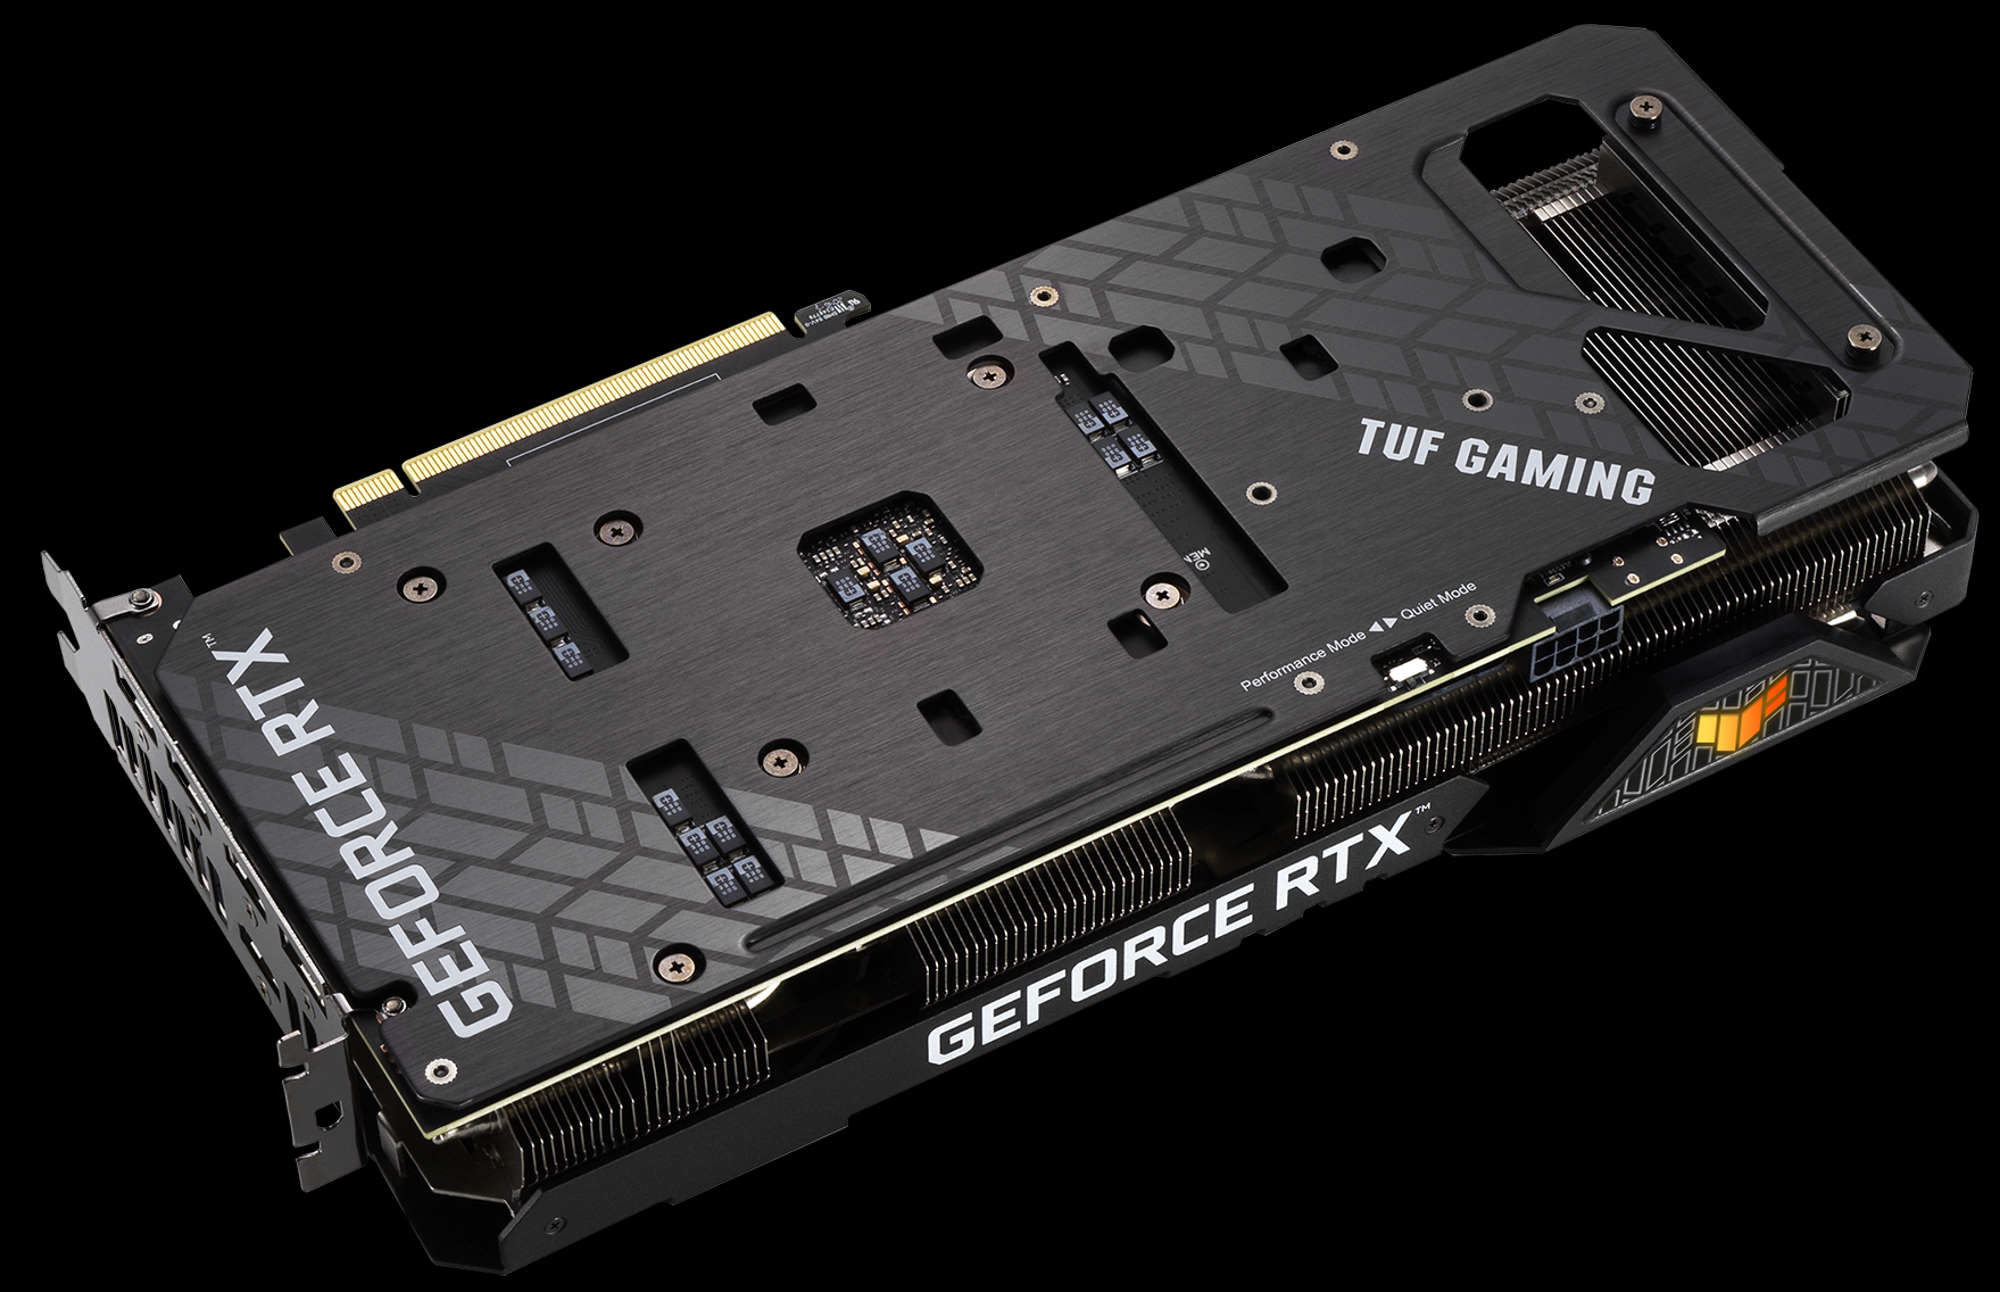 Backplate view of TUF Gaming GeForce RTX 3060.